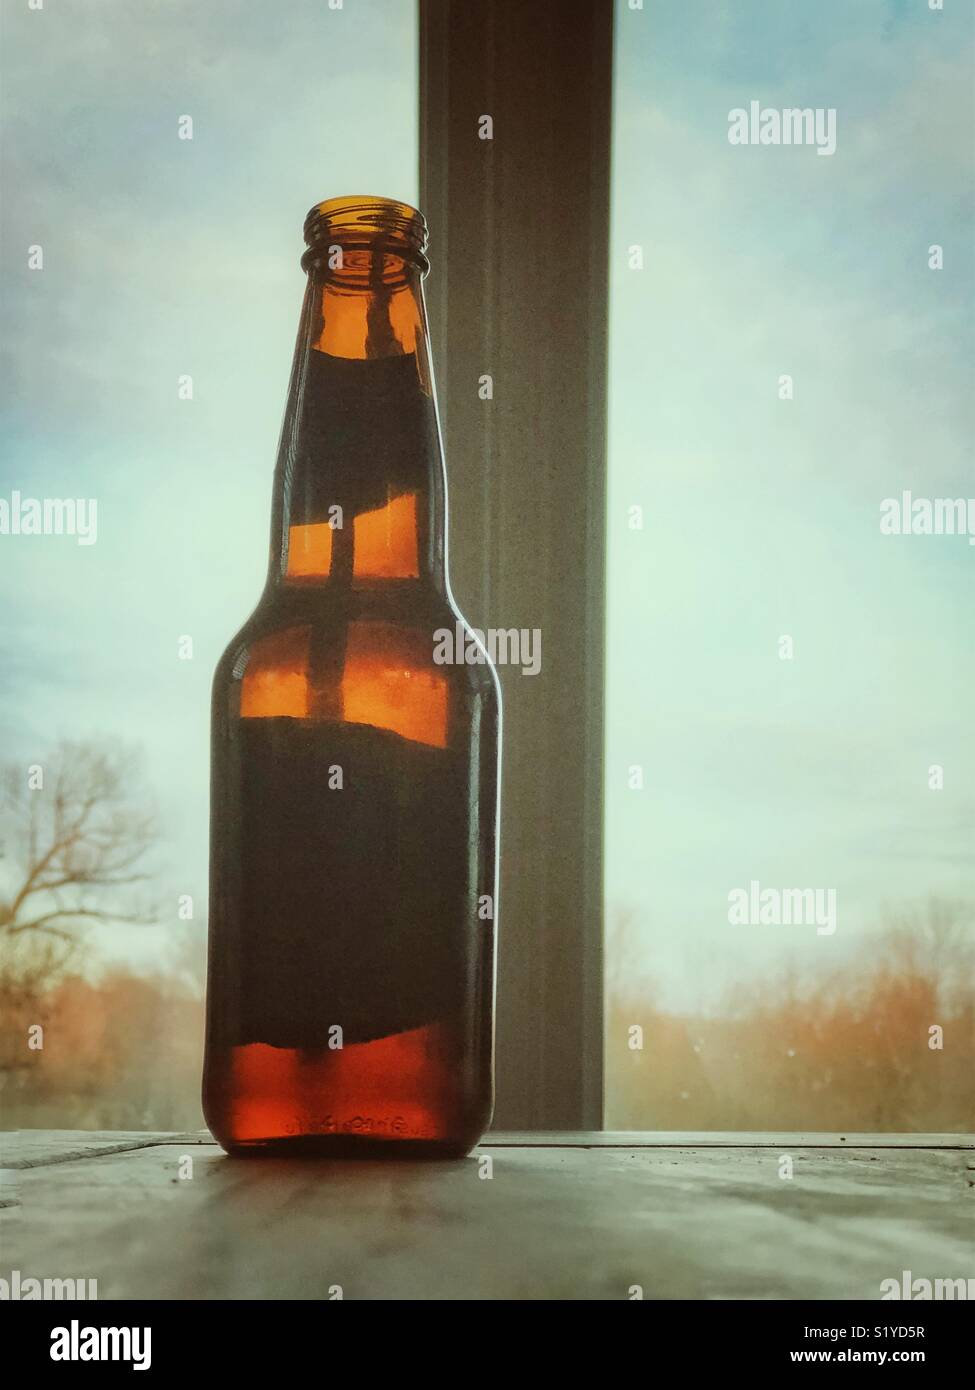 Bottle of beer in brown Amber bottle on wooden table silhouetted against window daylight scene Stock Photo